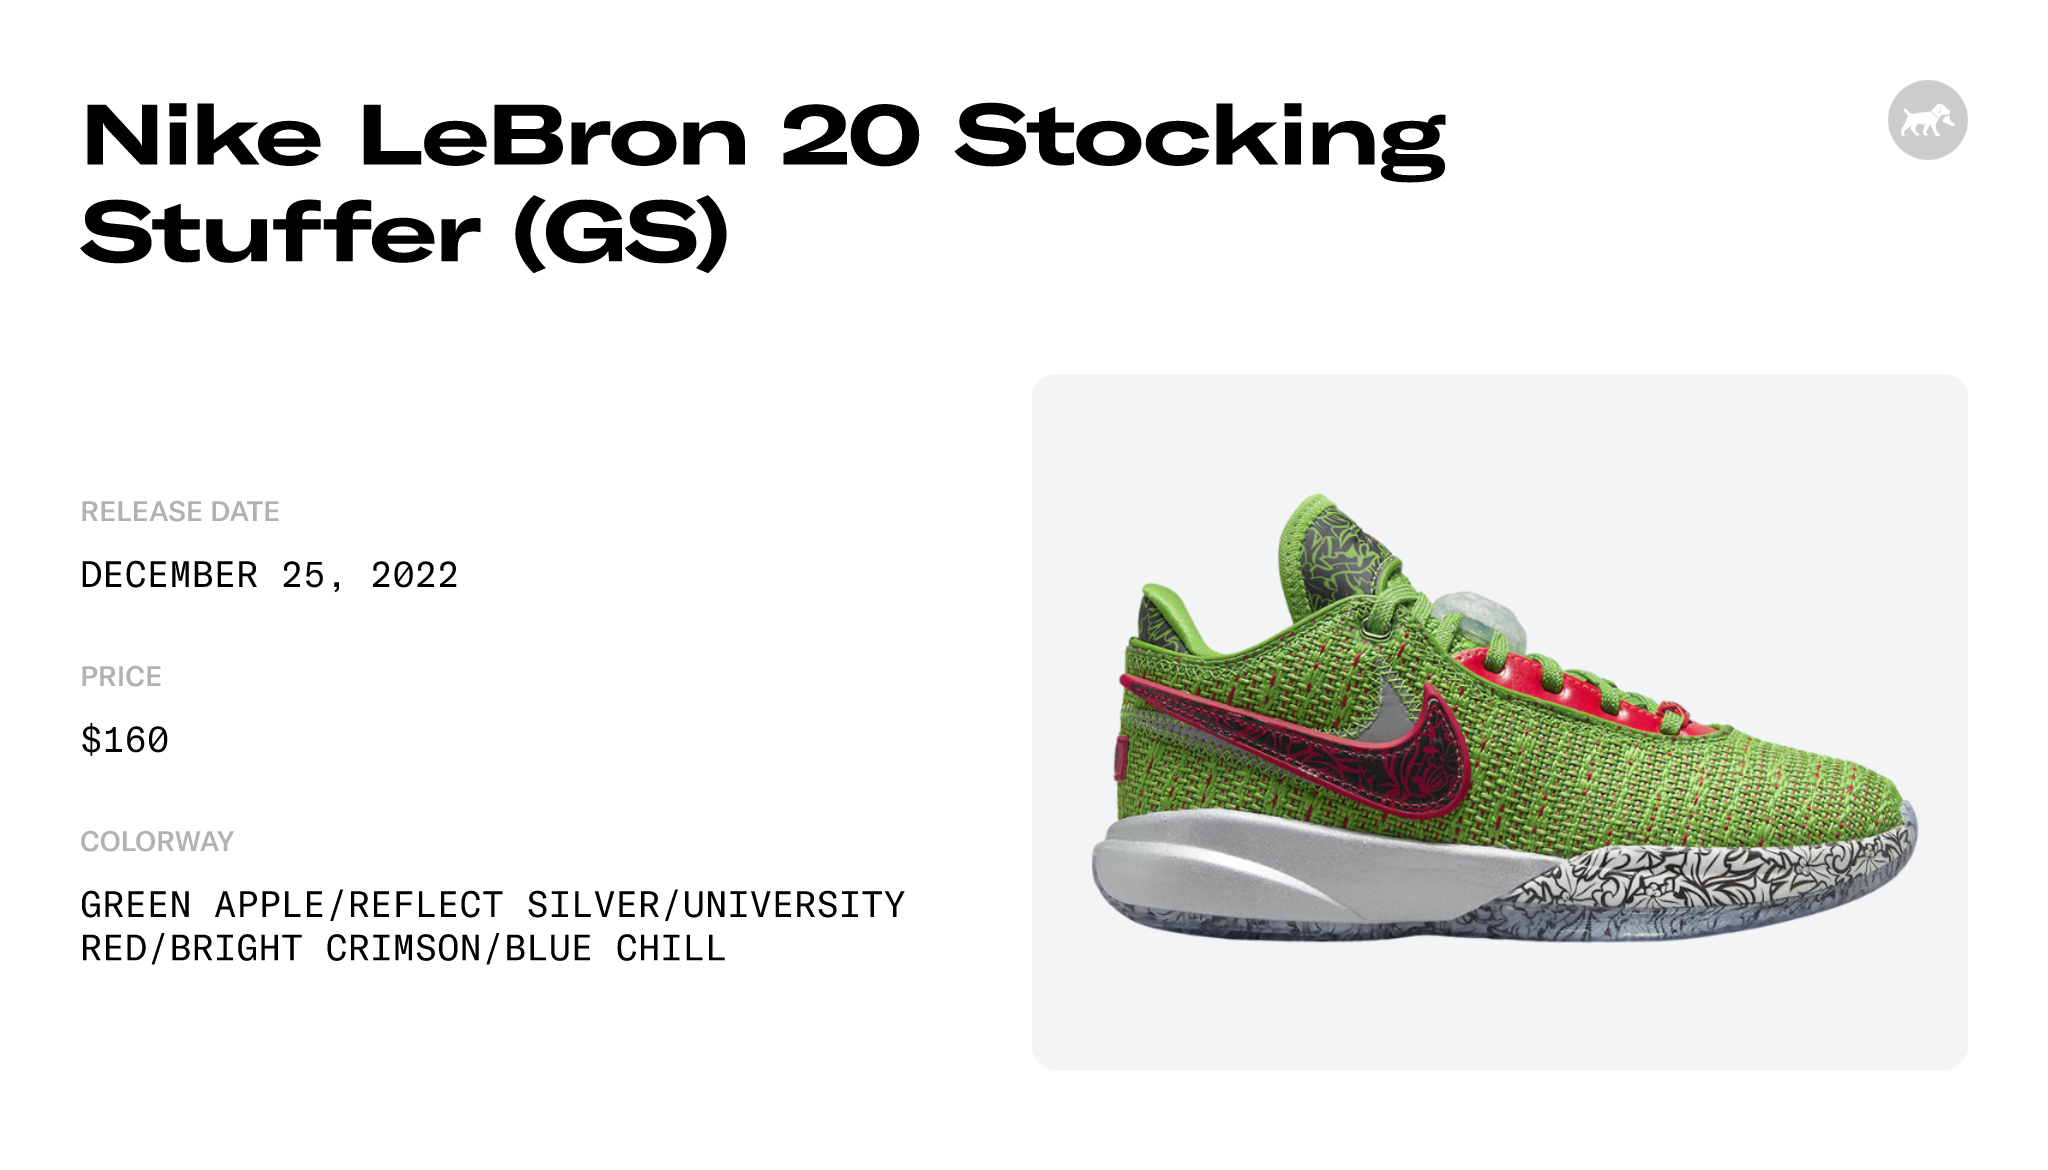 Nike LeBron 20 Stocking Stuffer (GS) - DQ8646-300 Raffles and Release Date